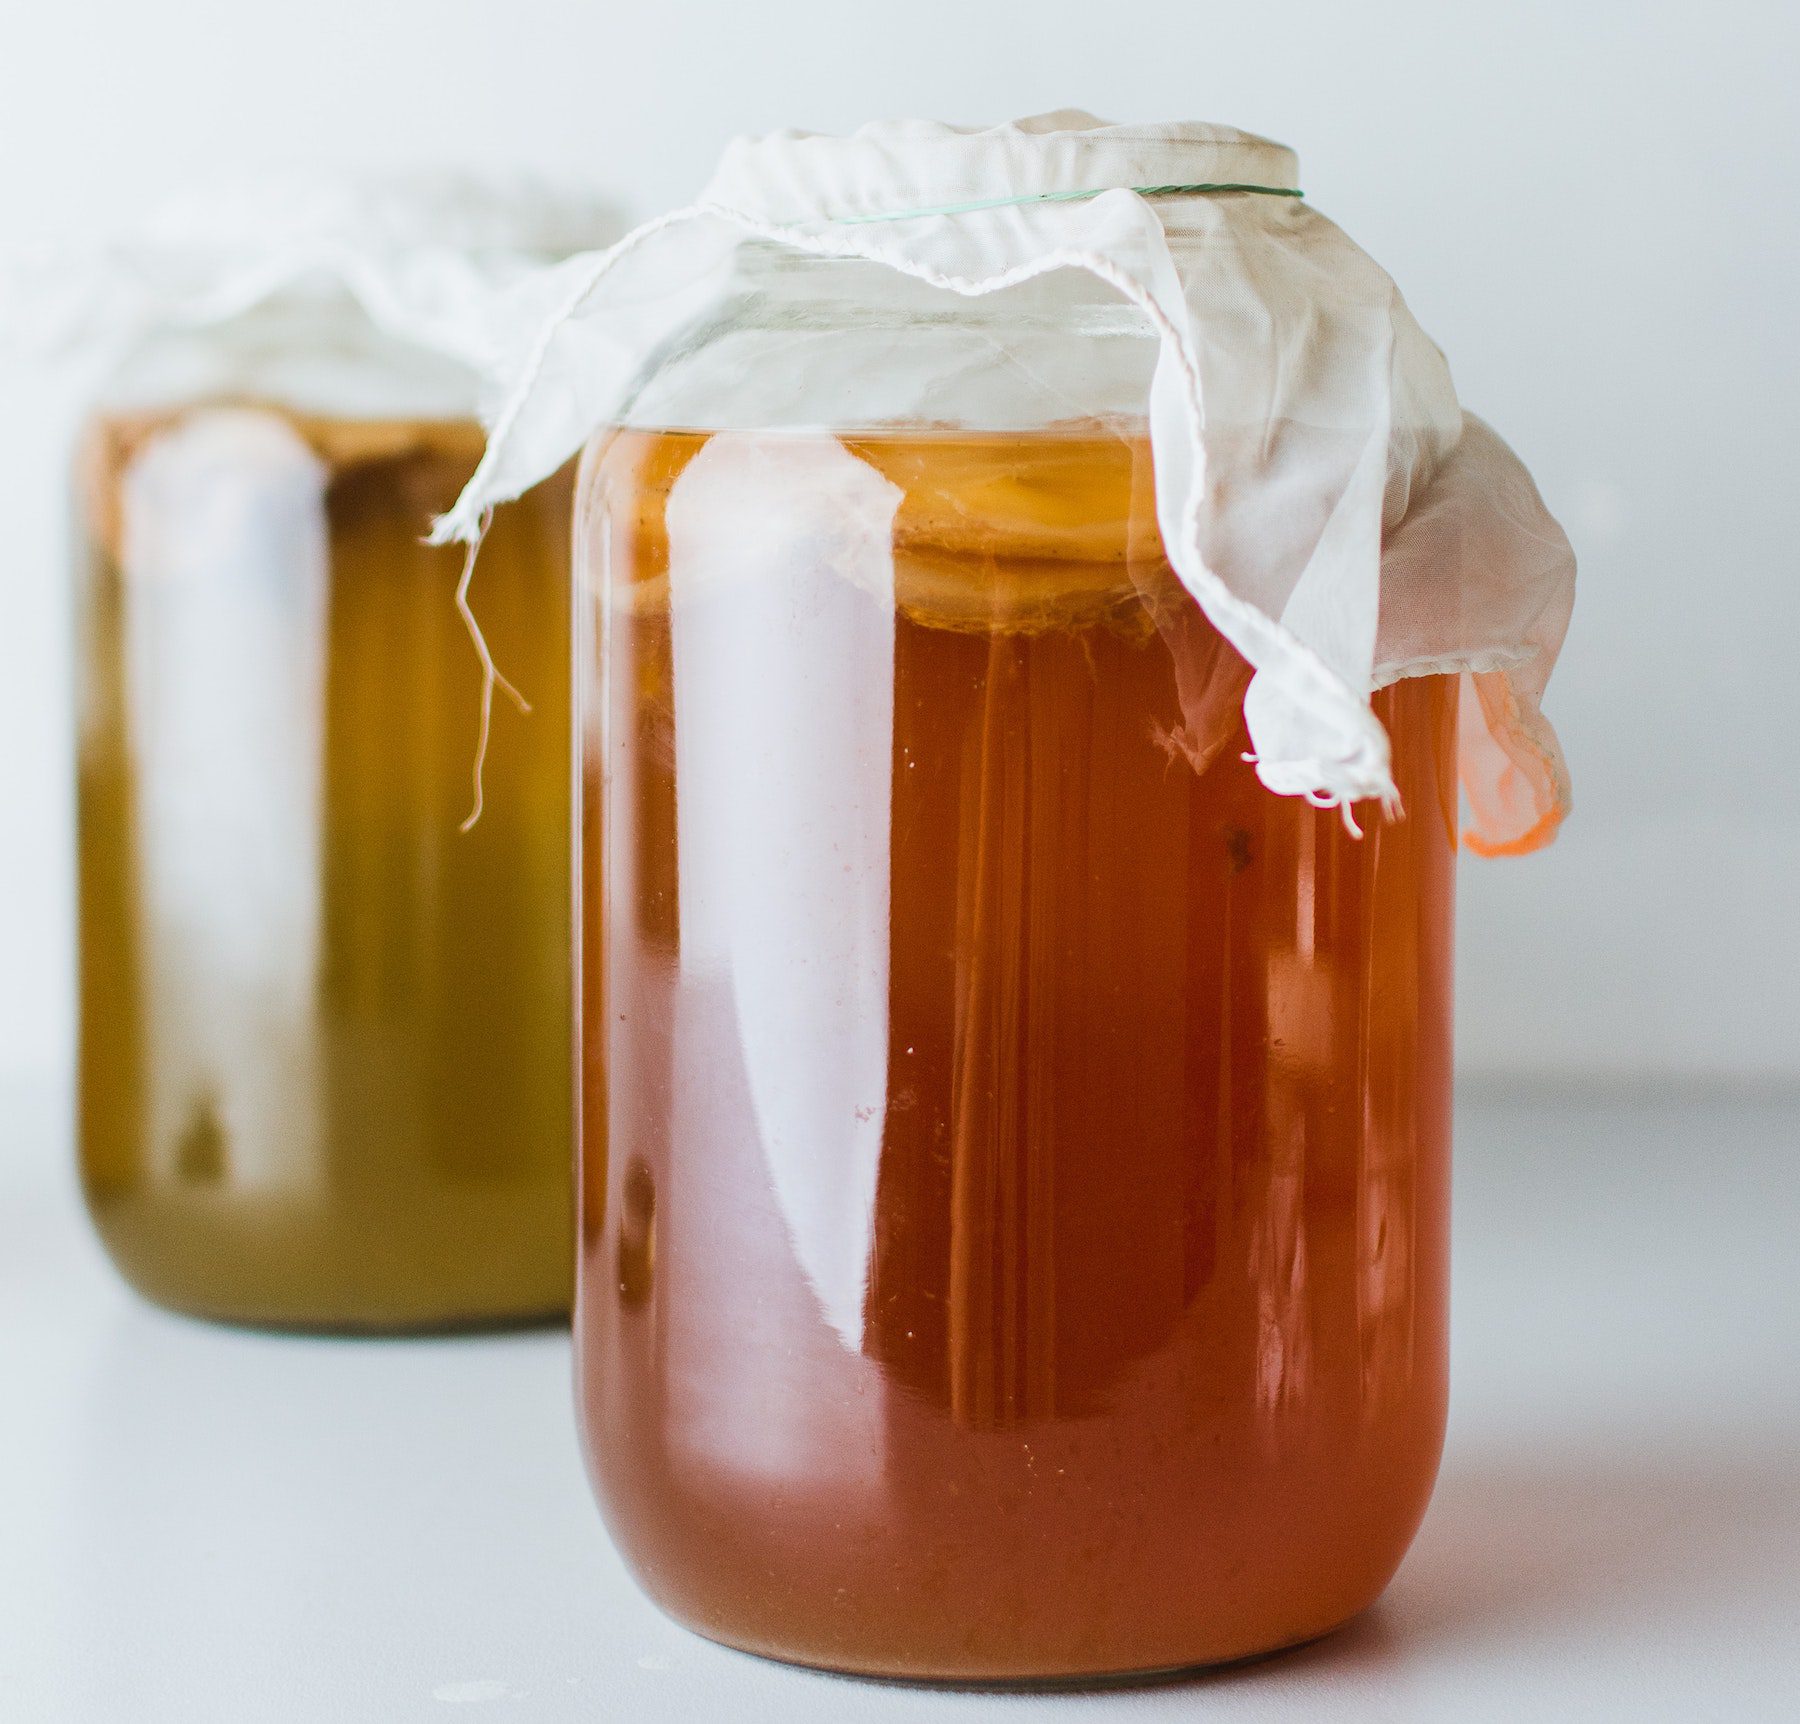 Two large jars of homemade kombucha covered with cloth and rubber bands.